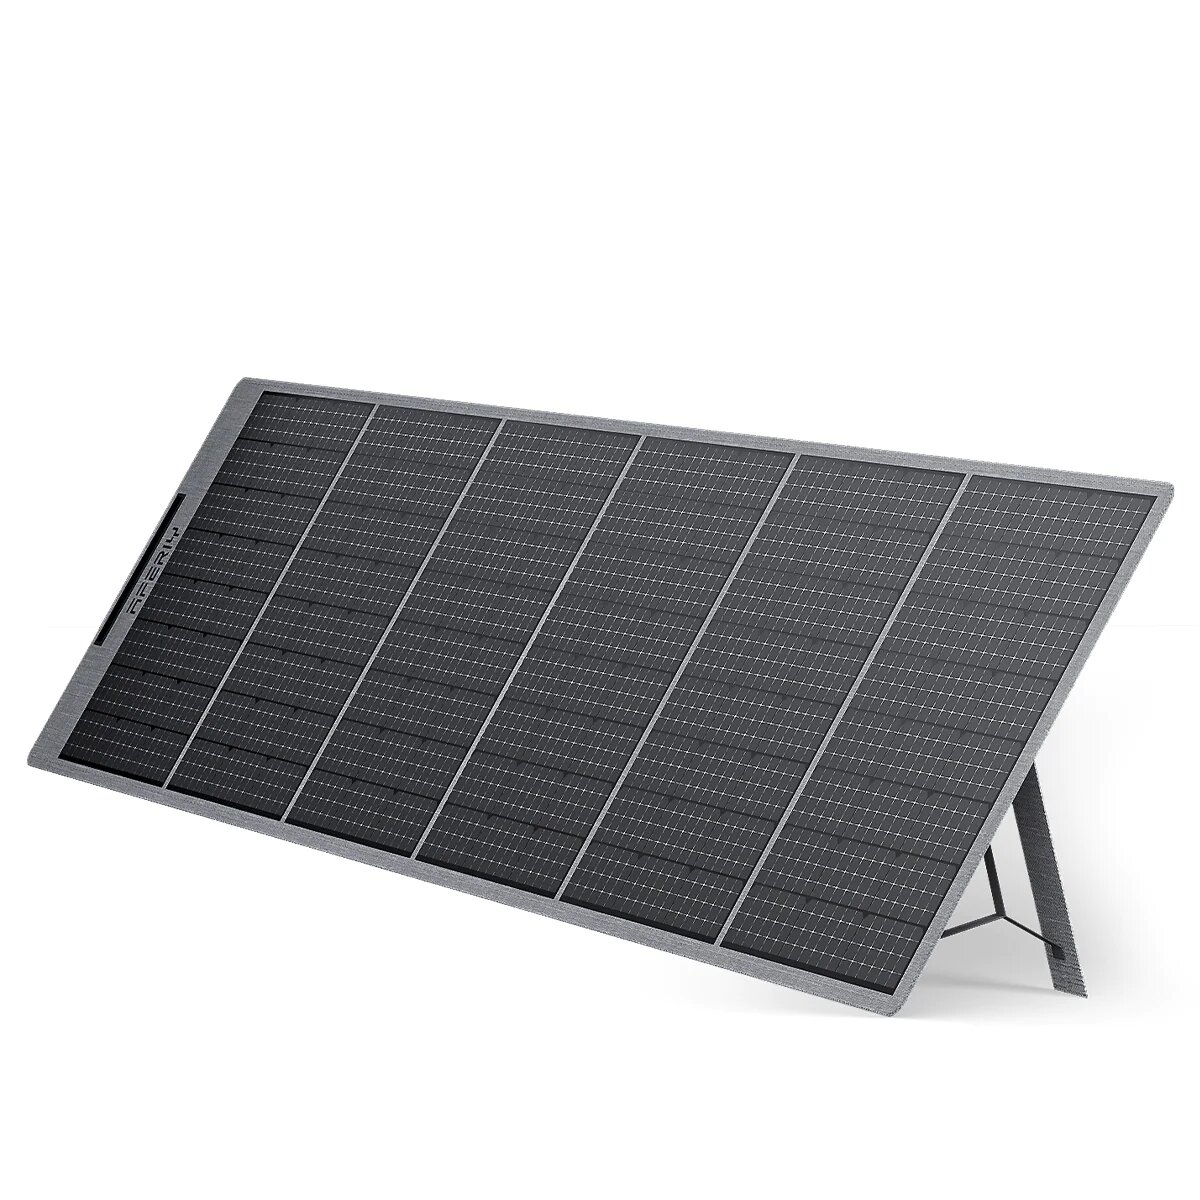 [EU Direct] AFERIY AF-S400 400W Lightweight Portable Solar Panels Foldable Mono Cell Solar Charger with USB DC Outputs IP65 Waterproof Solar Panel for RV Outdoor Camping